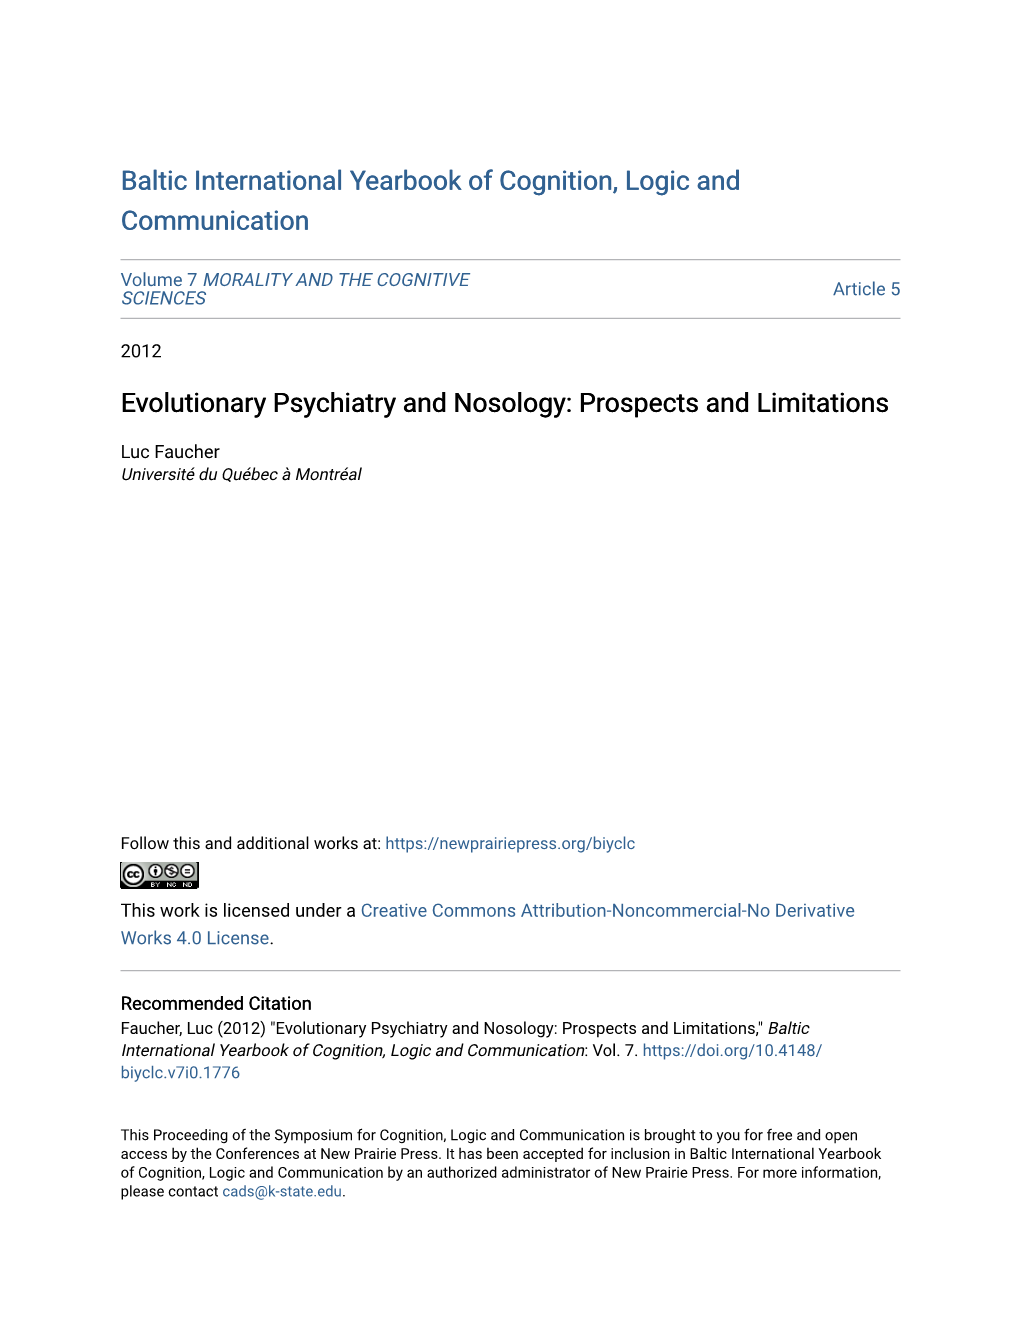 Evolutionary Psychiatry and Nosology: Prospects and Limitations